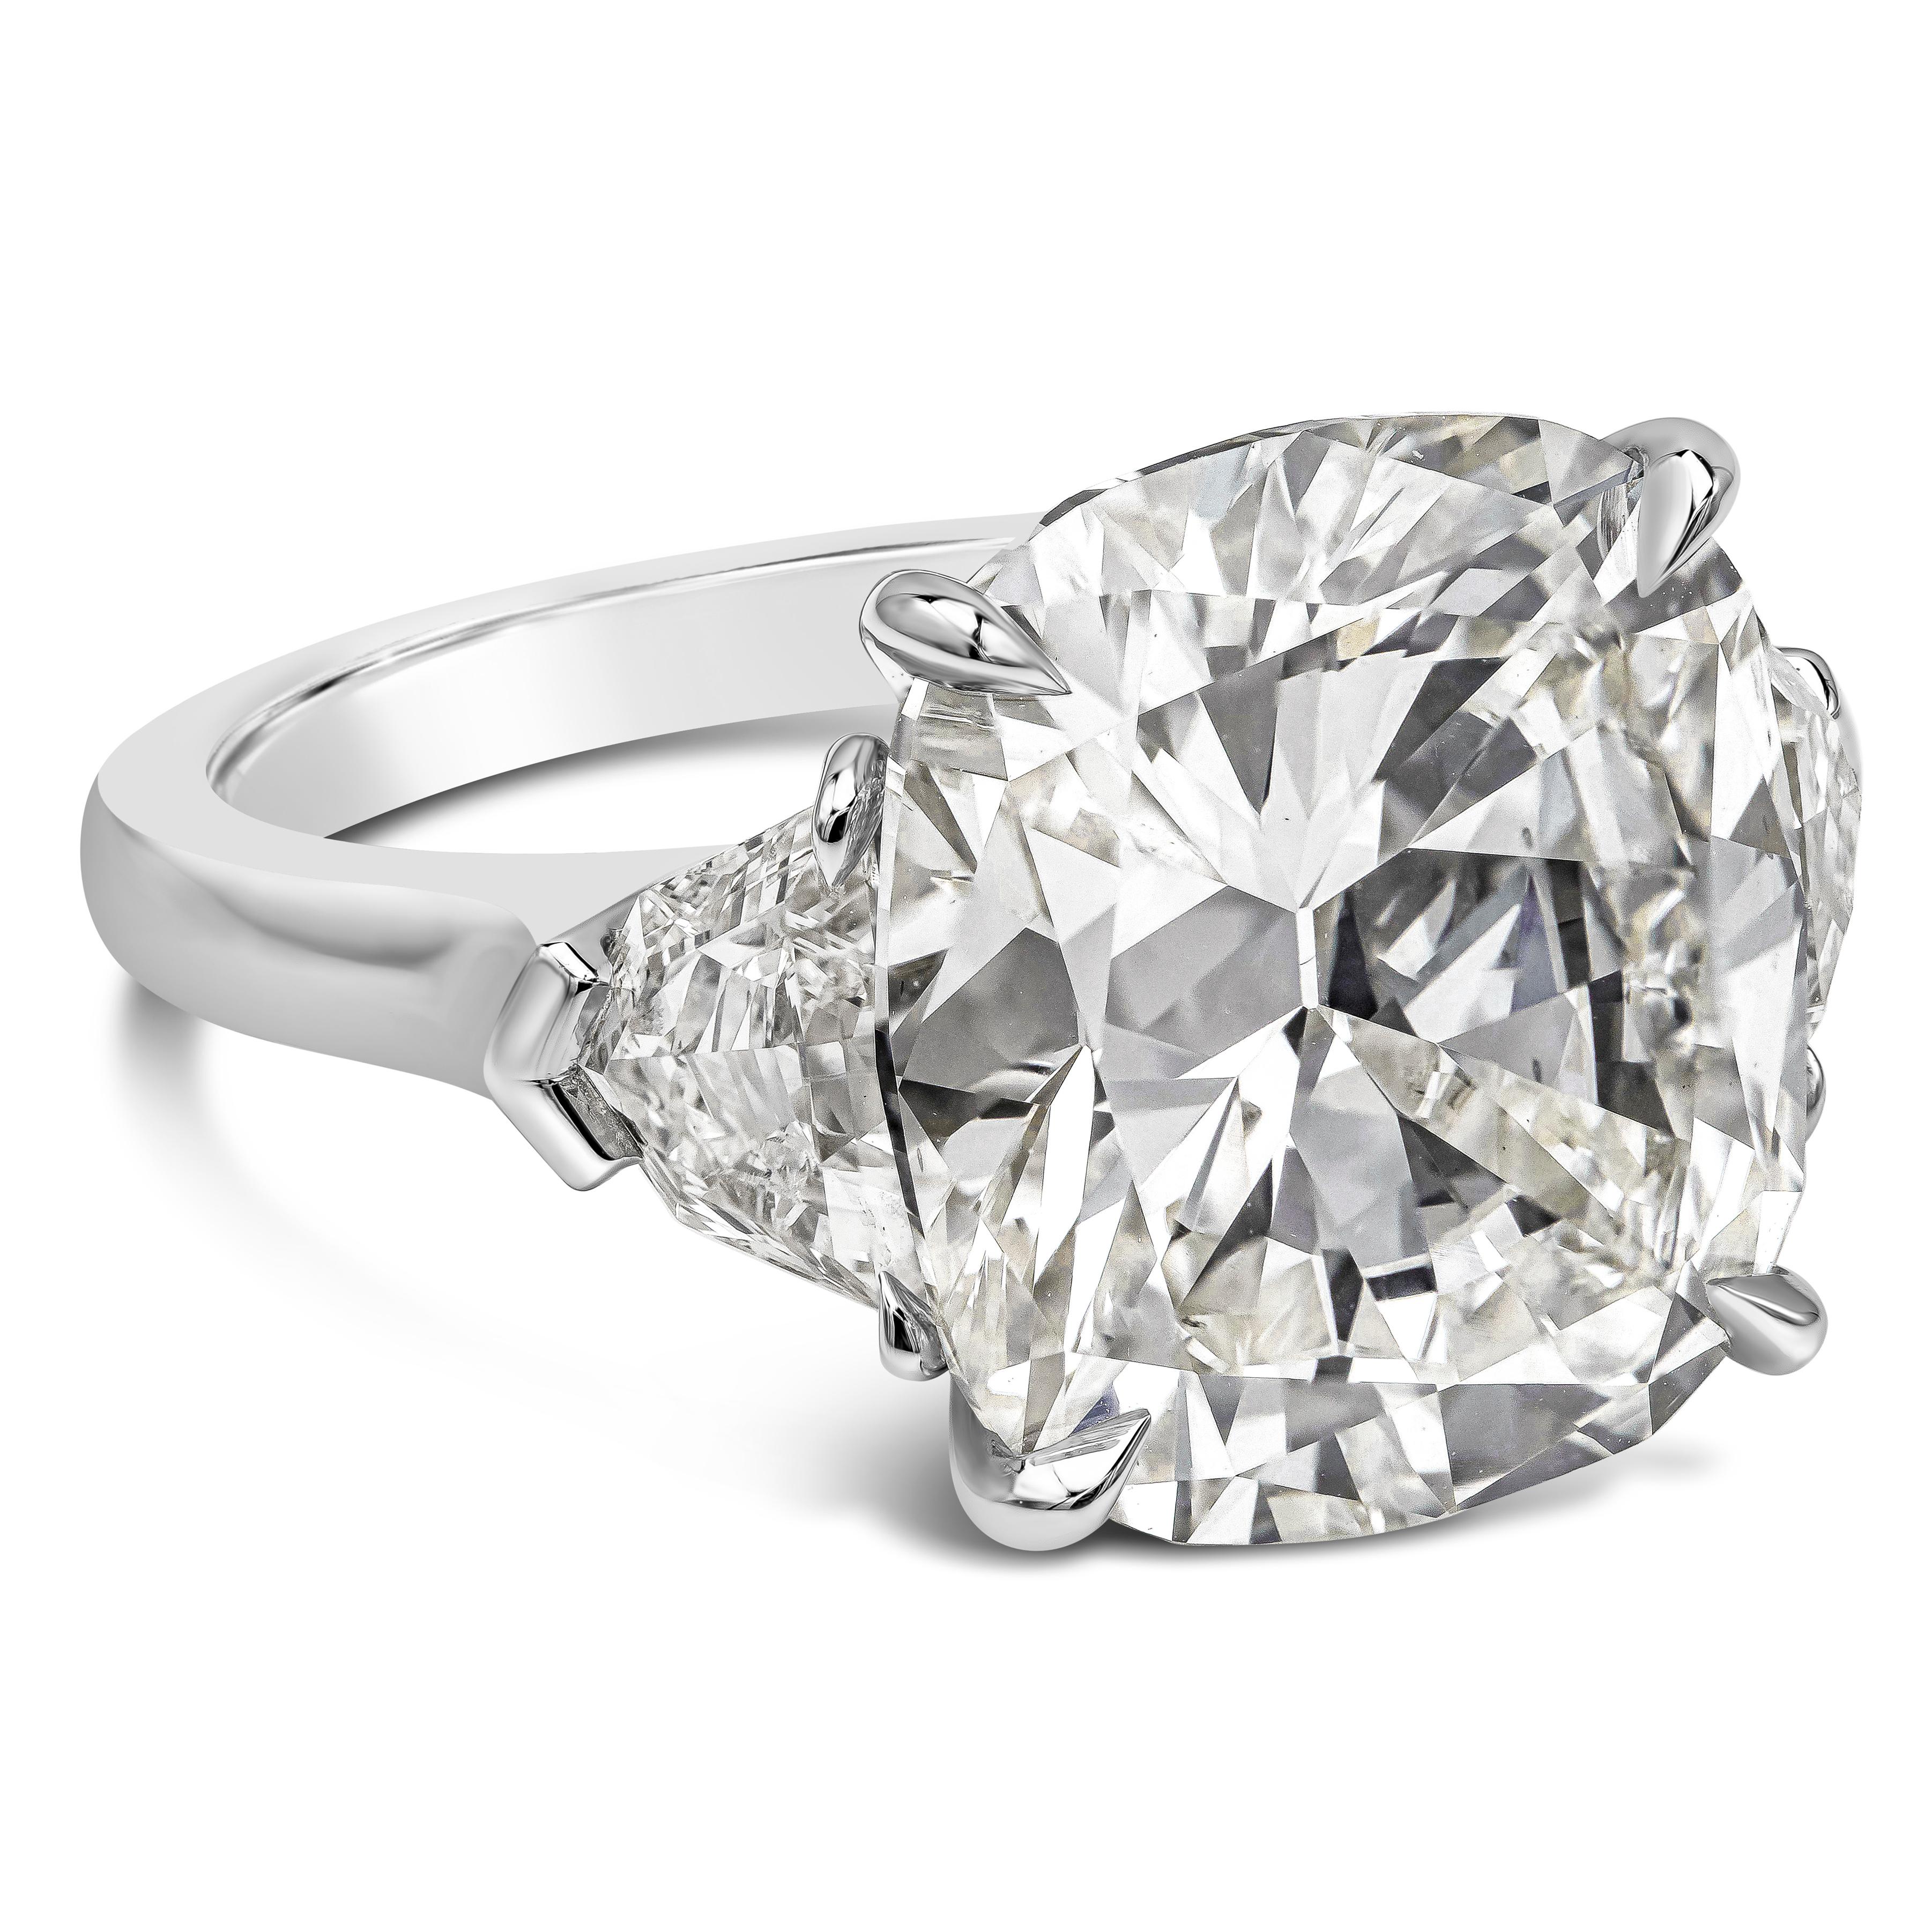 A beautiful engagement ring, featuring a 10.26 carat cushion cut diamond certified by GIA as J color and VS2 clarity. Flanked by epaulette diamonds on each side weighing 1.36 carats total with I color and VS clarity. Set on platinum. Size 6 US,